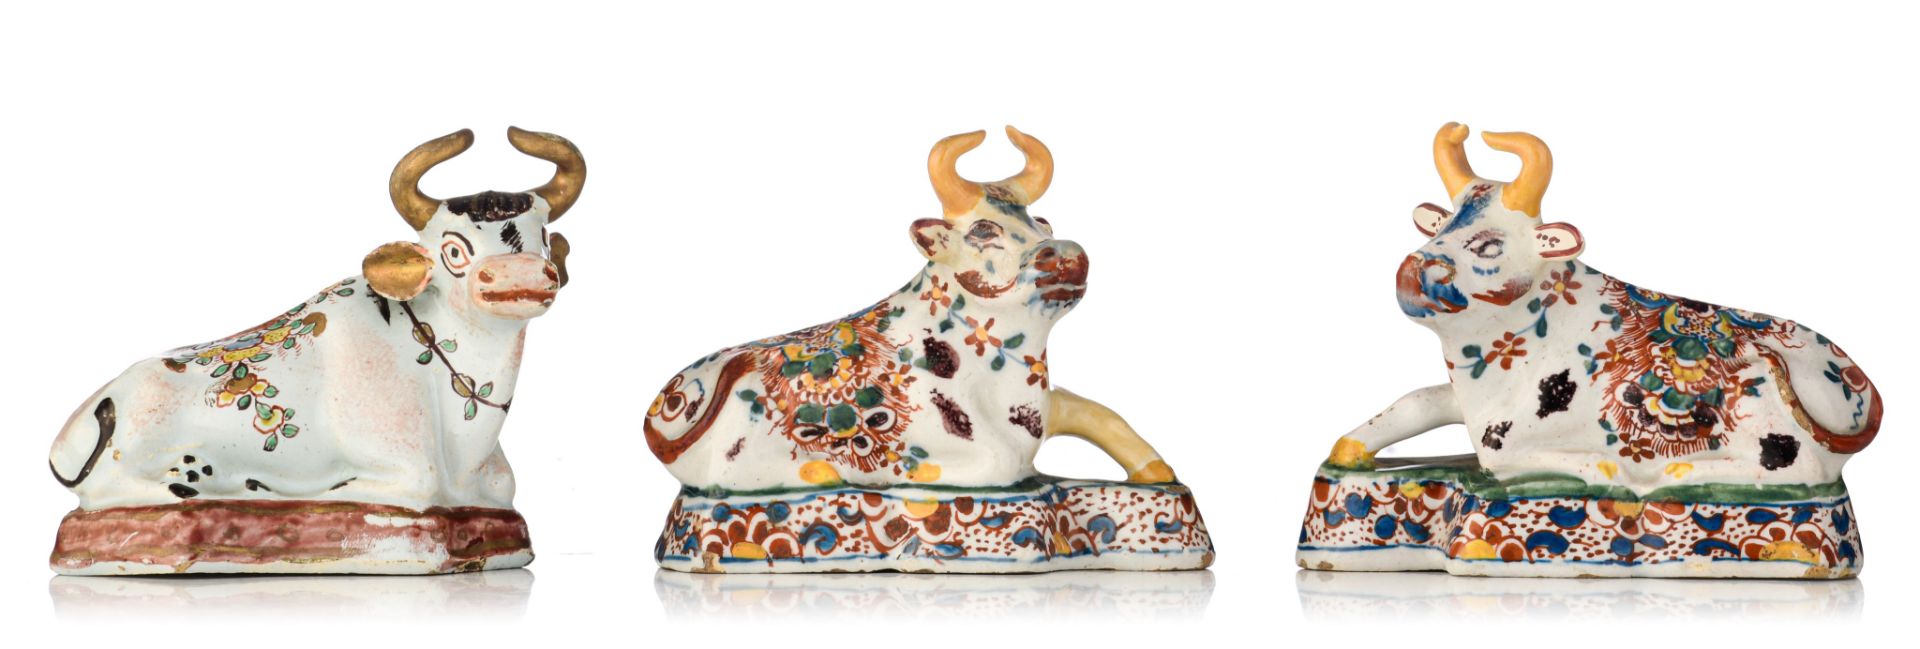 A pair of and a ditto Dutch Delft polychrome figure of a recumbent cow, 18thC, H 8-9 cm